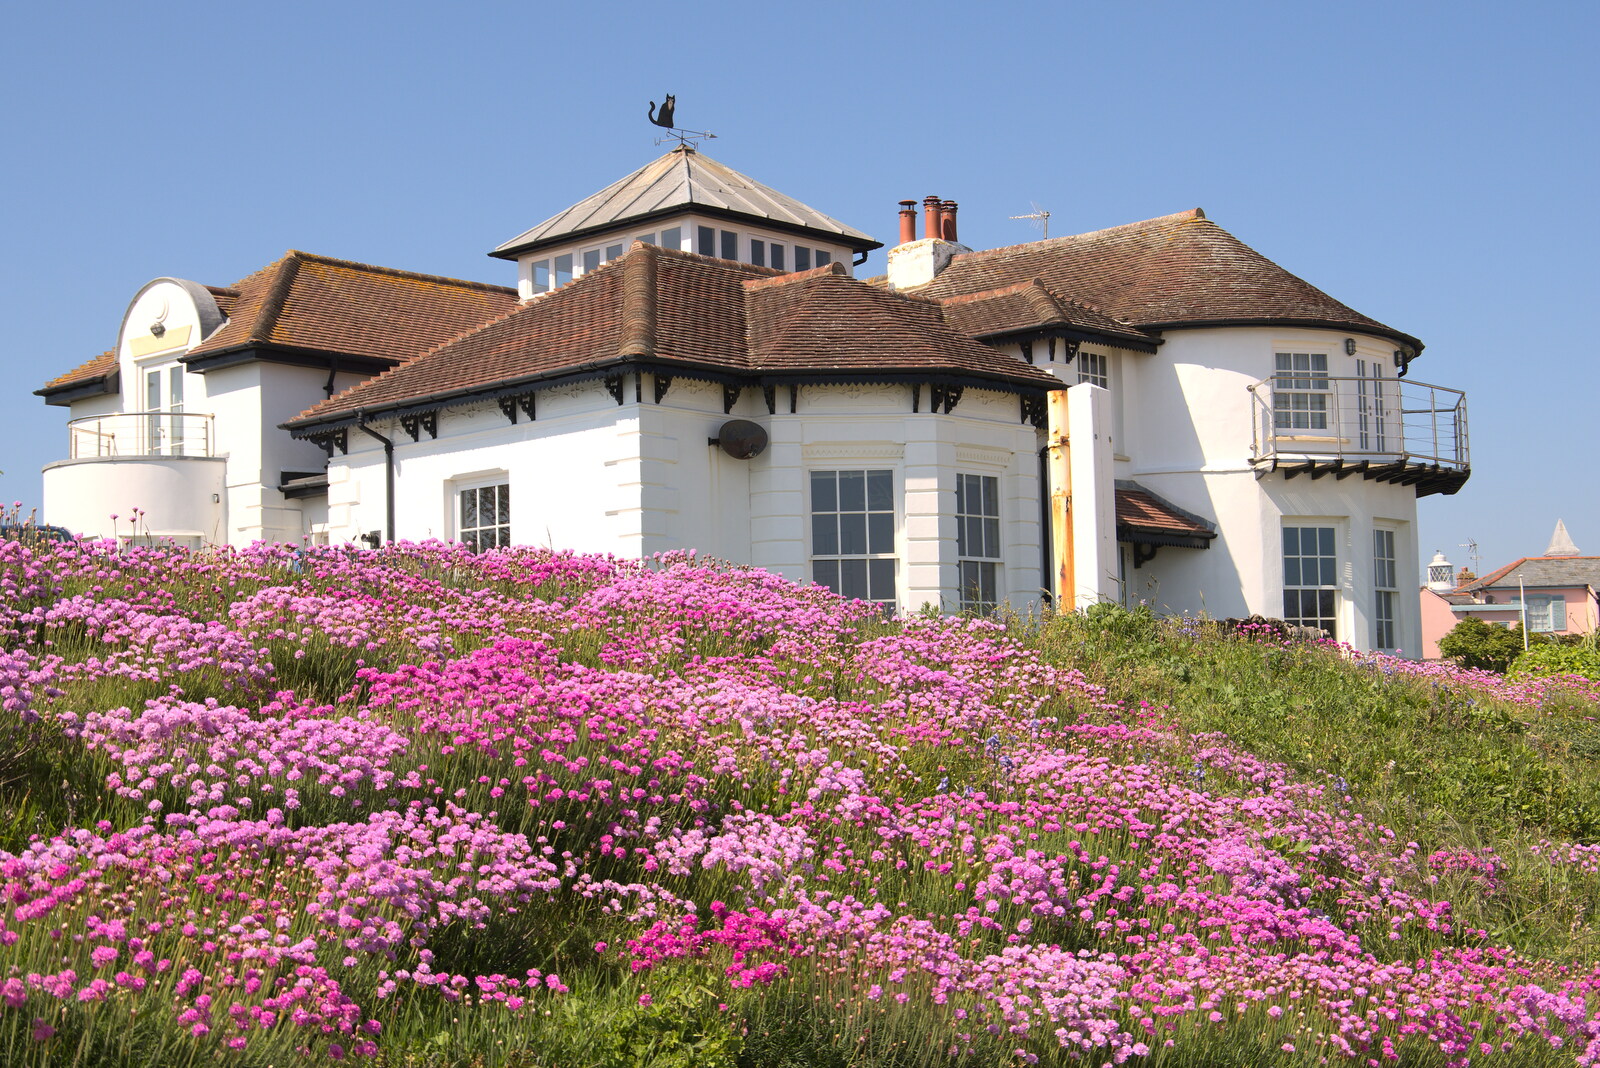 Cliff-top house and a load of pink flowers from A Day at the Beach with Sis, Southwold, Suffolk - 31st May 2021